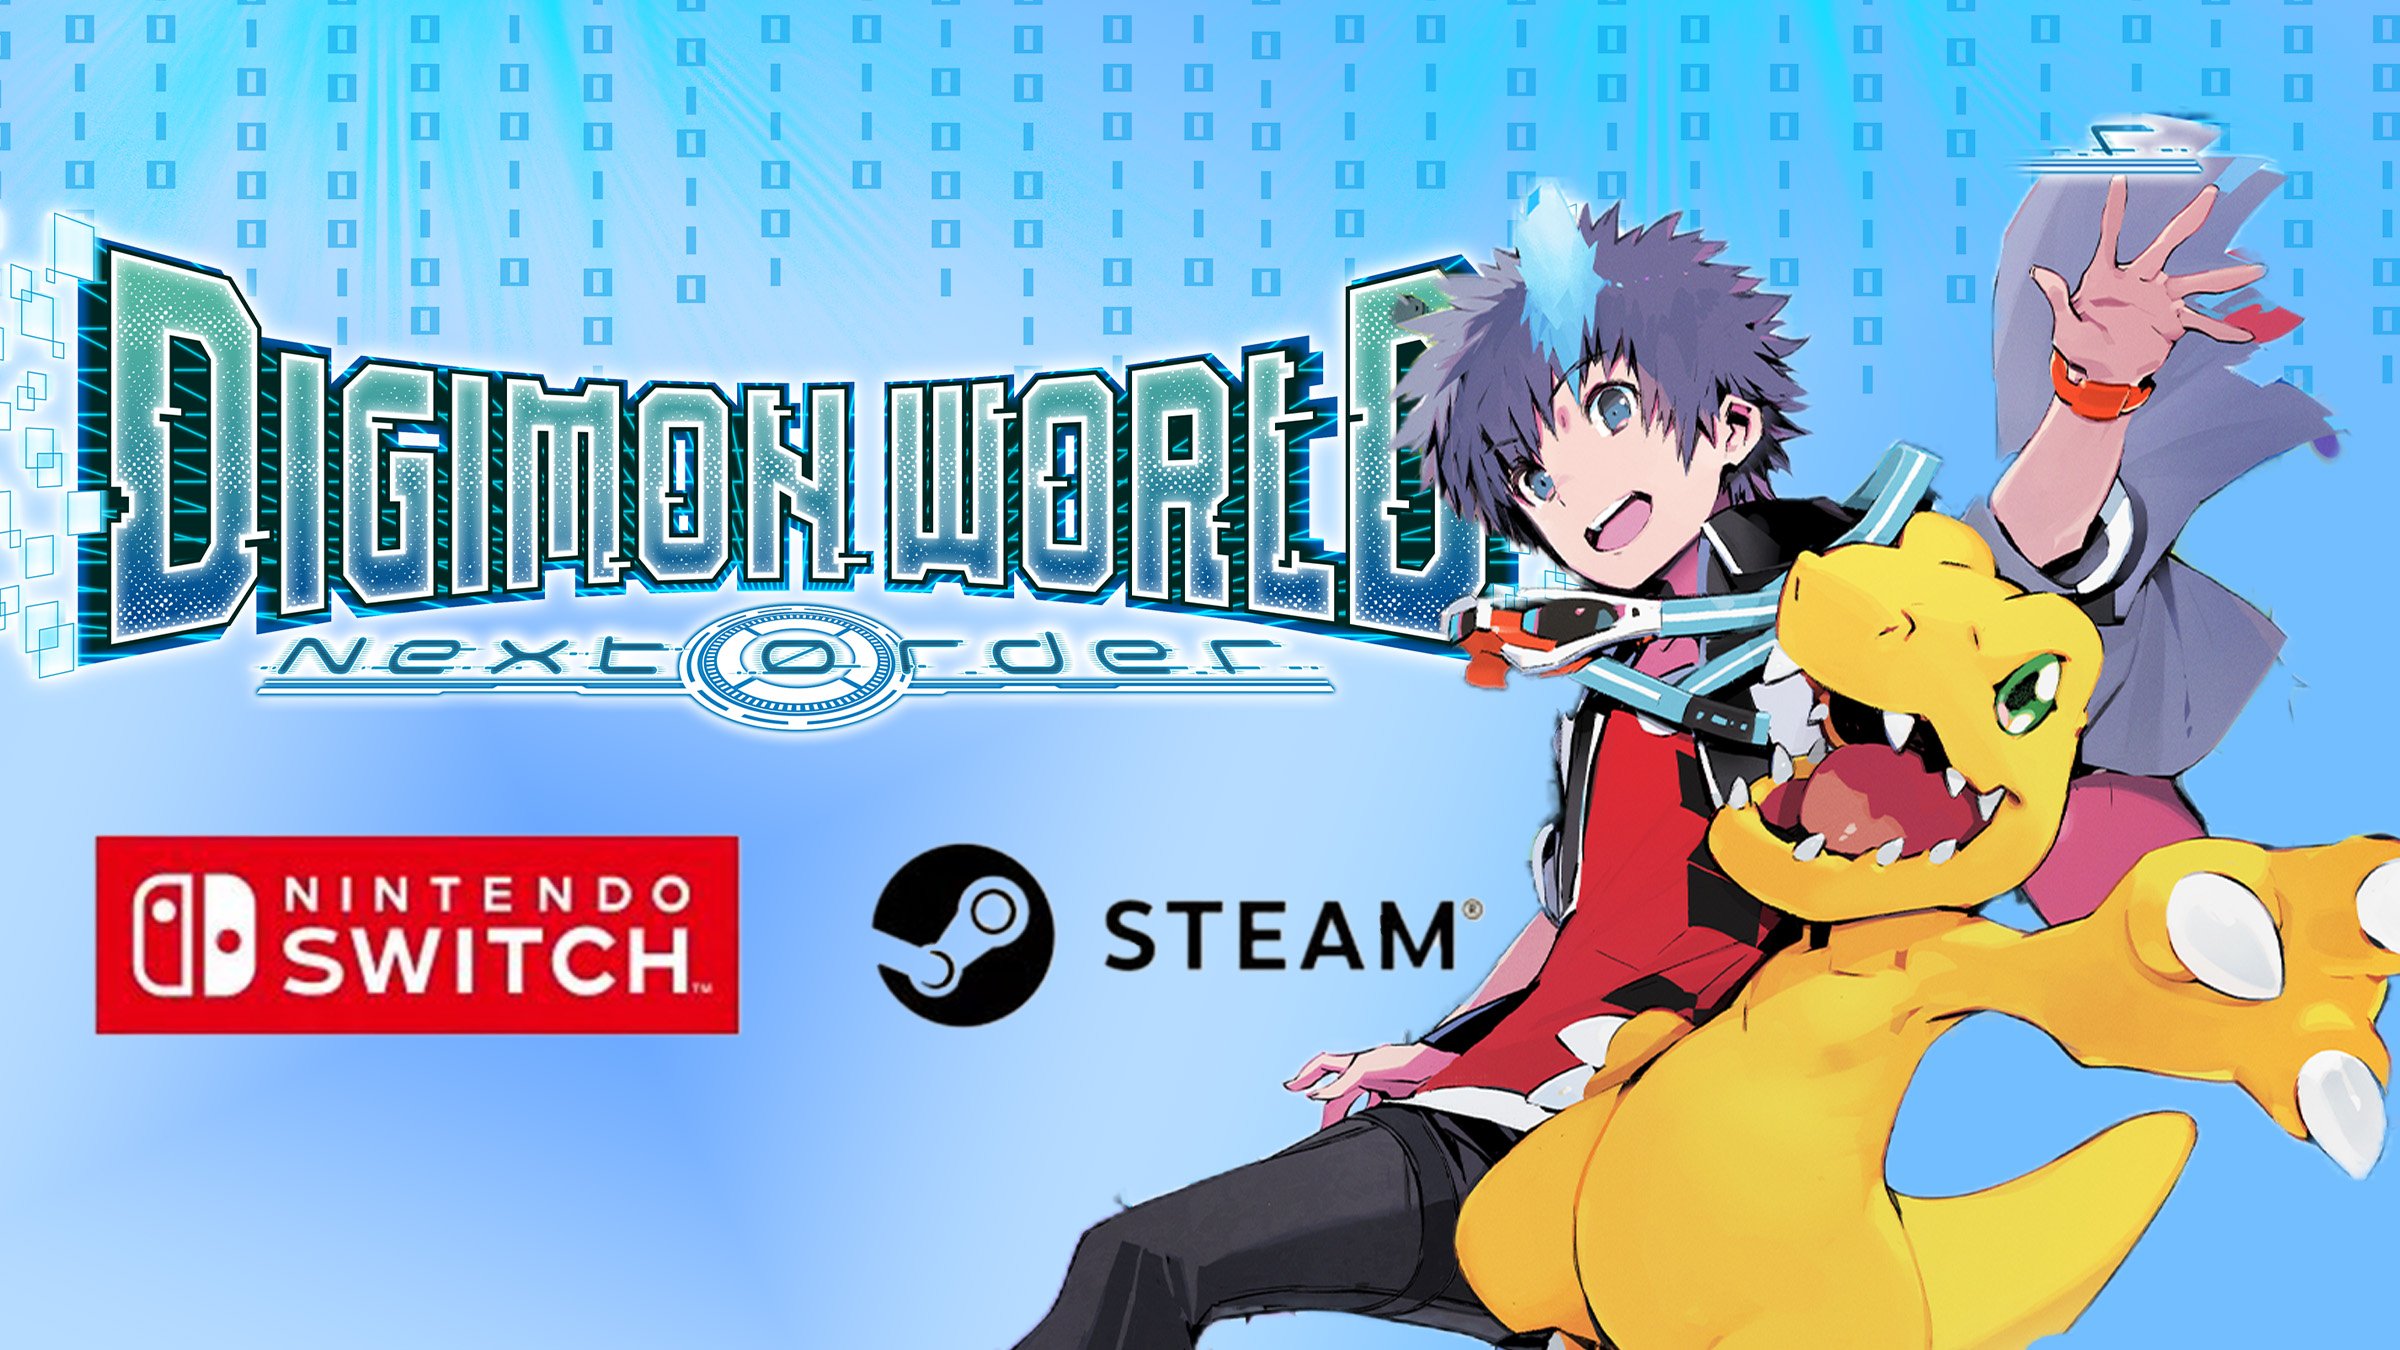 Digimon World Next Order Blessing Fans with PC and Switch release